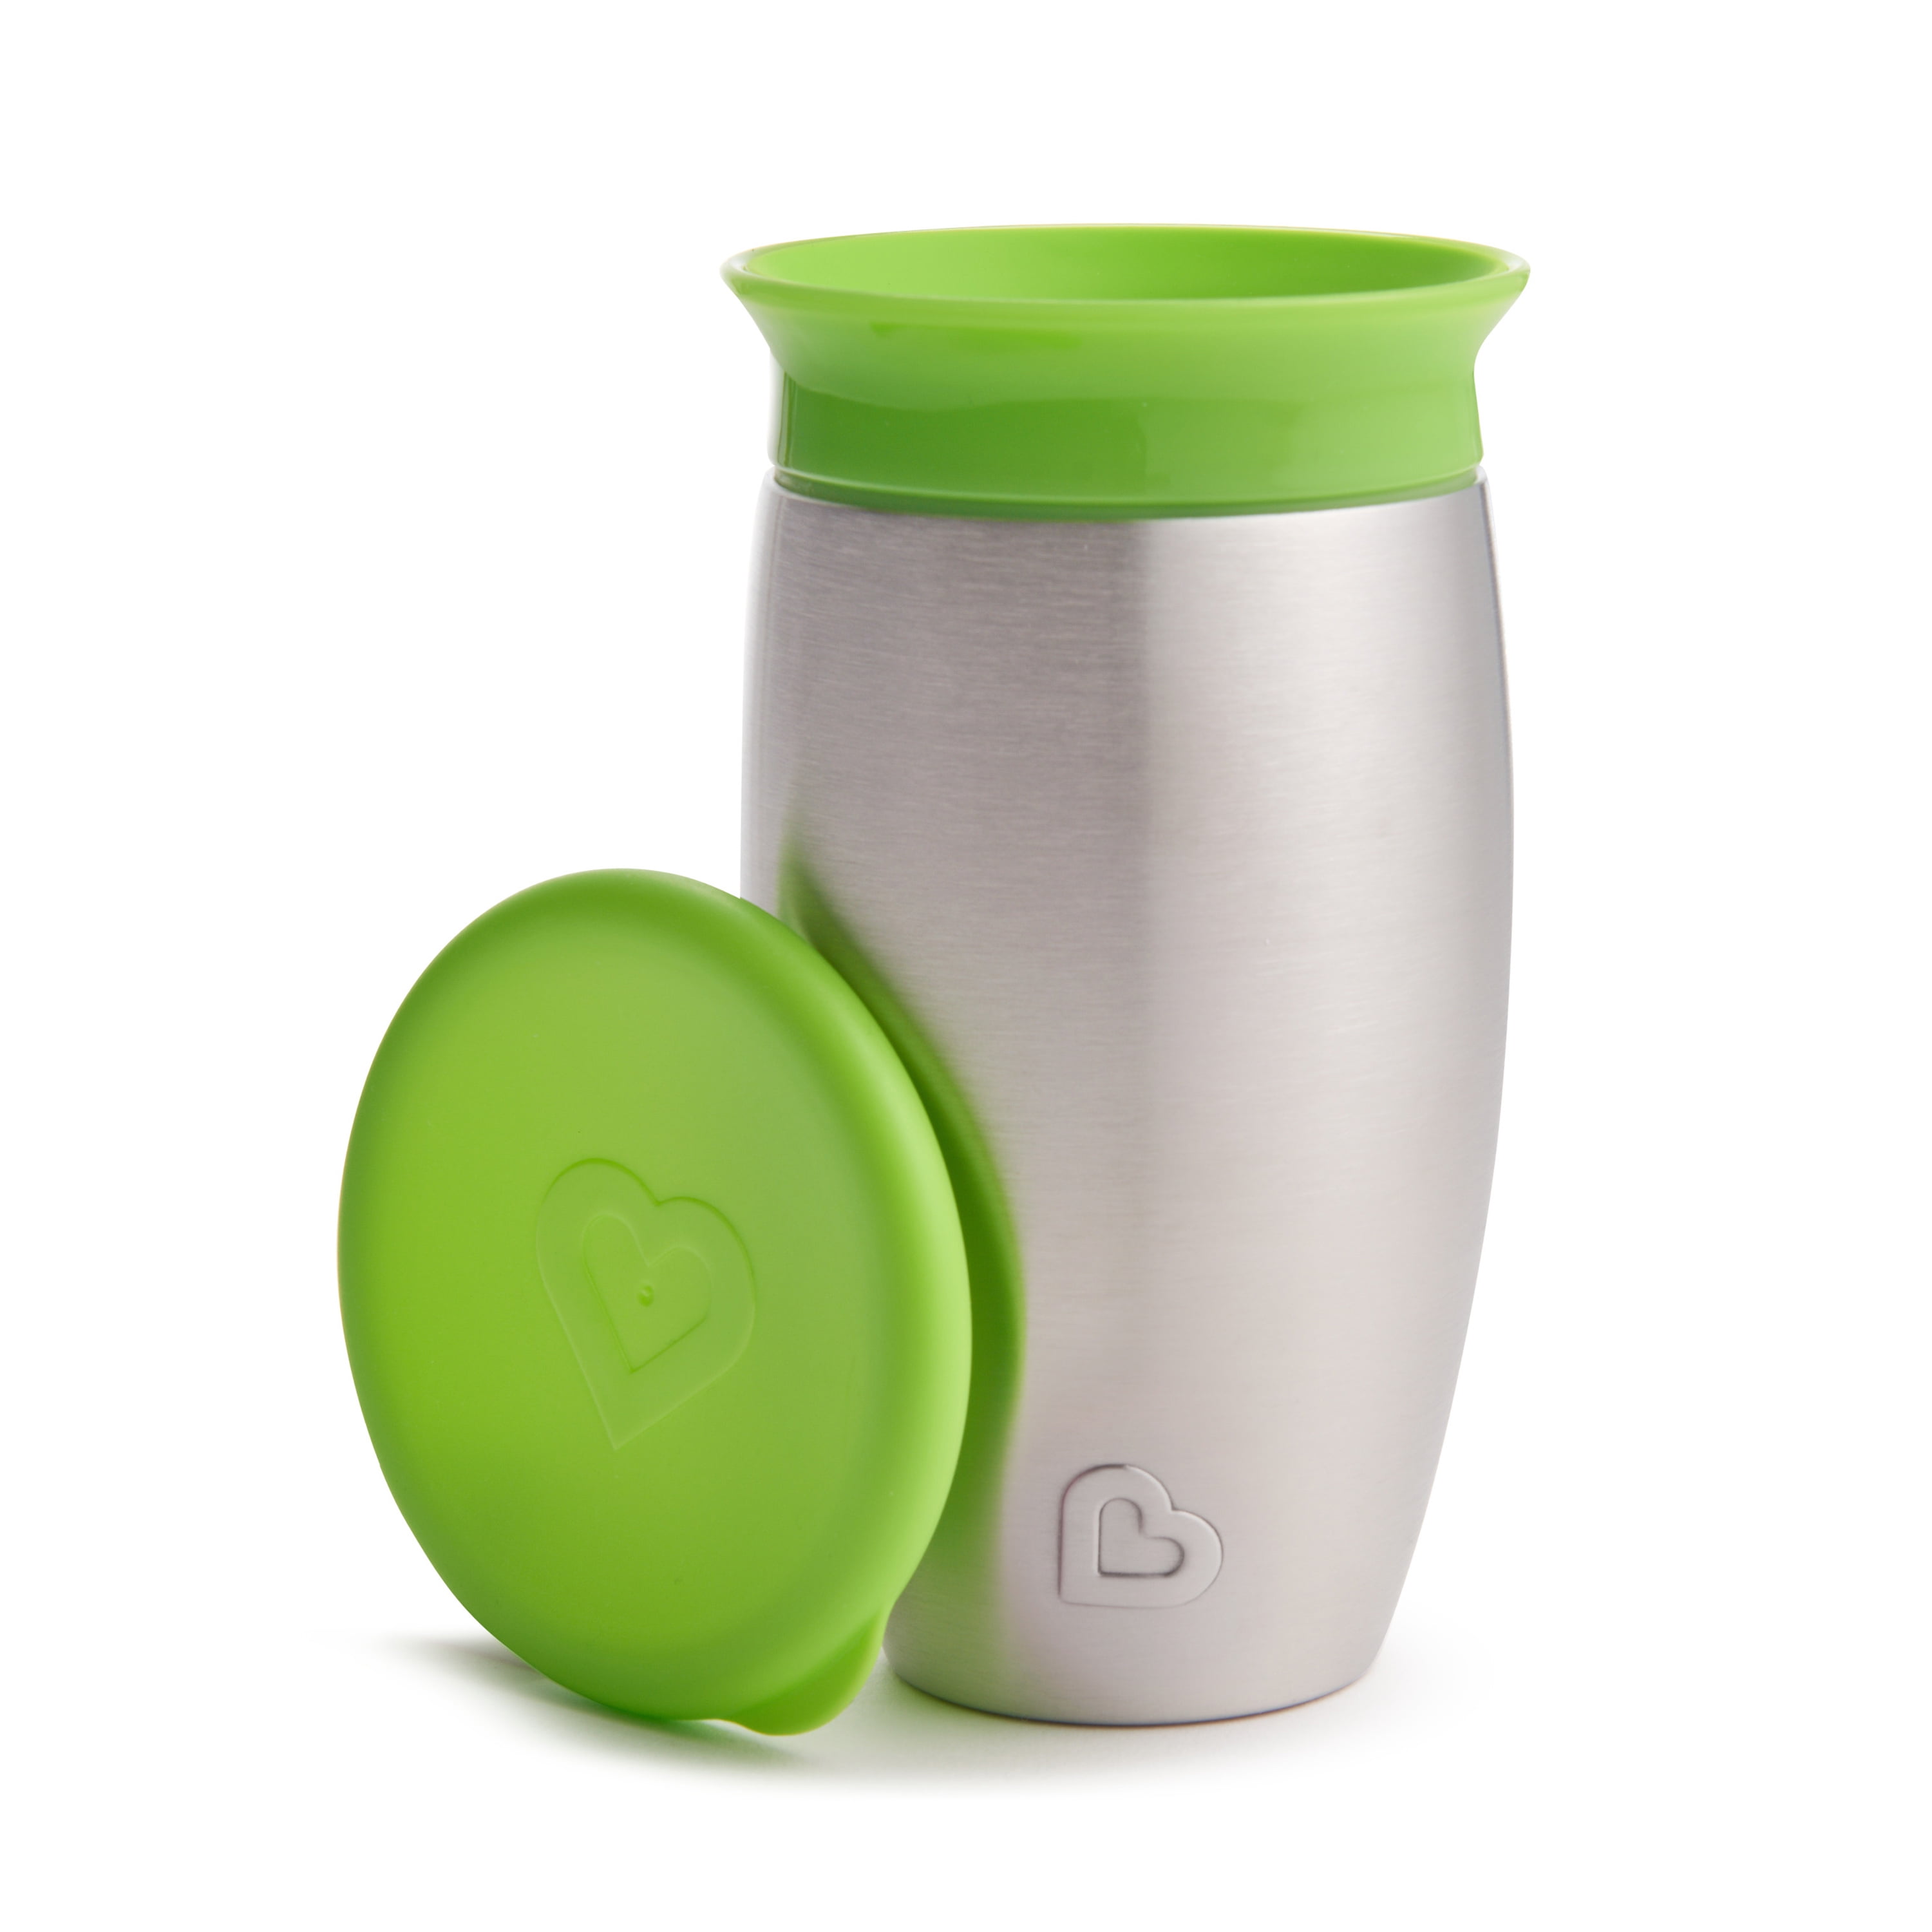 Munchkin Miracle 360 Spoutless Stainless Steel Sippy Cup, 10oz, Green Munchkin Sippy Cup Stainless Steel